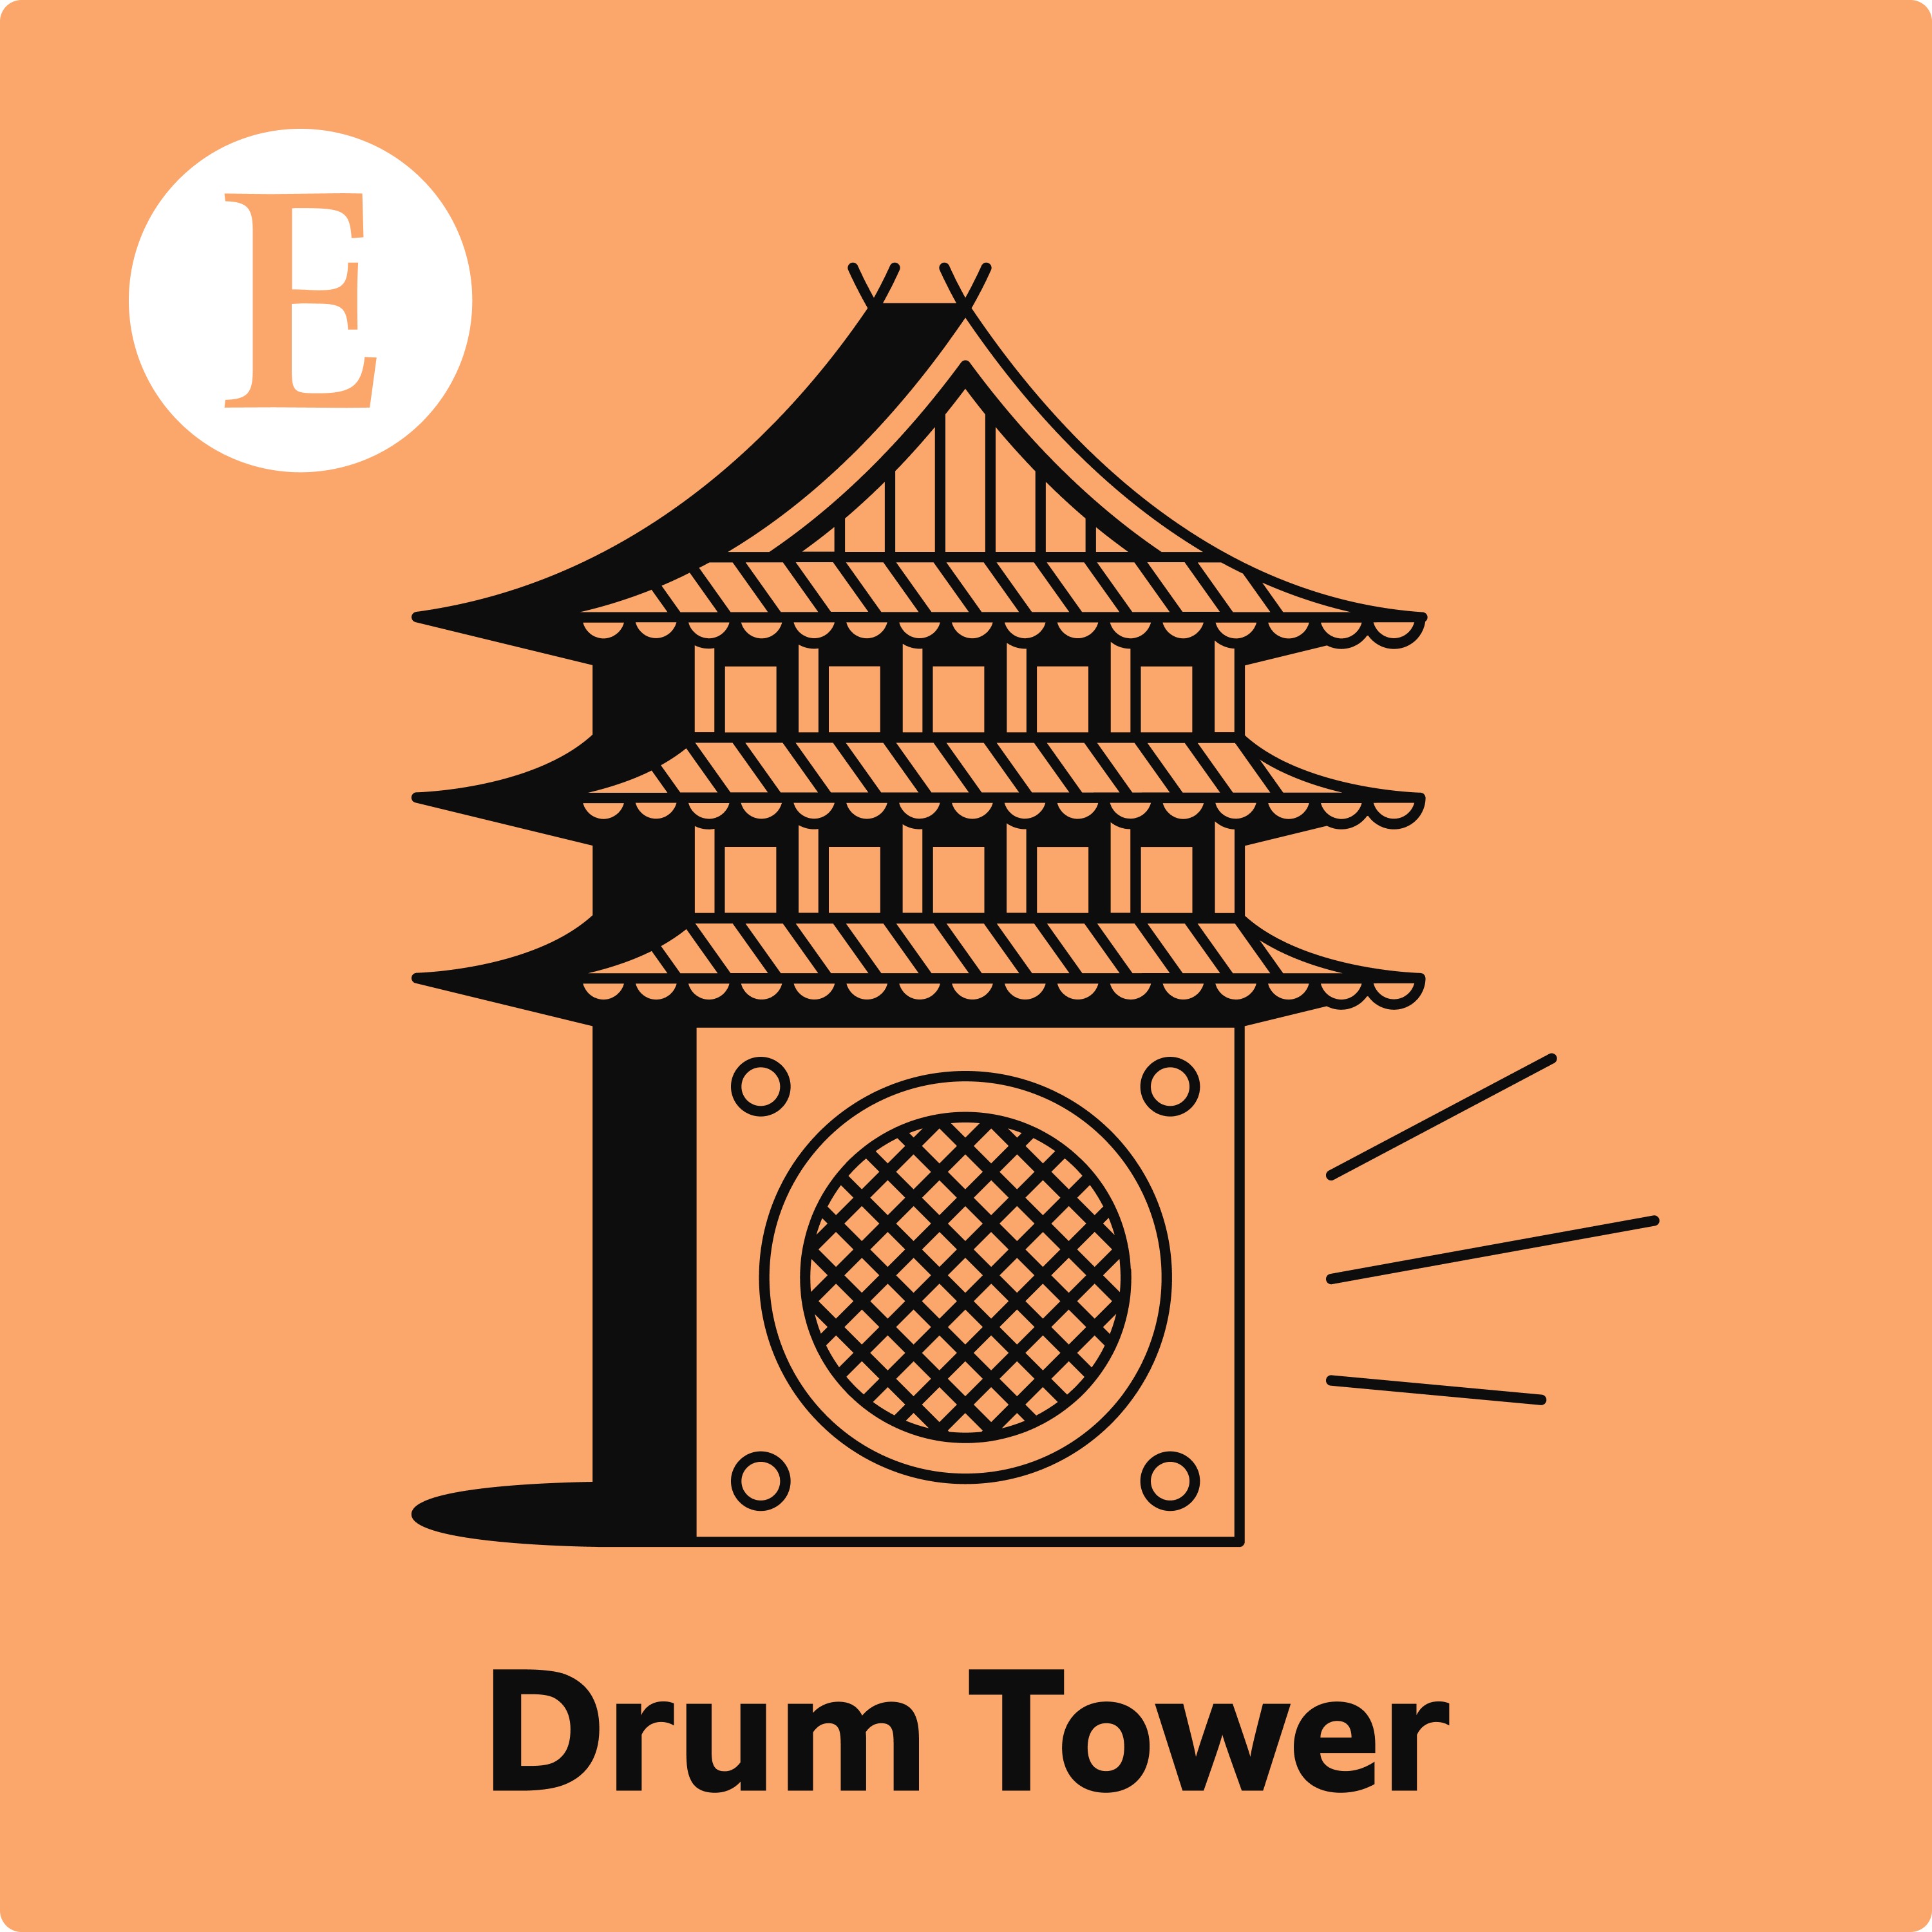 Drum Tower: Nuclear reaction